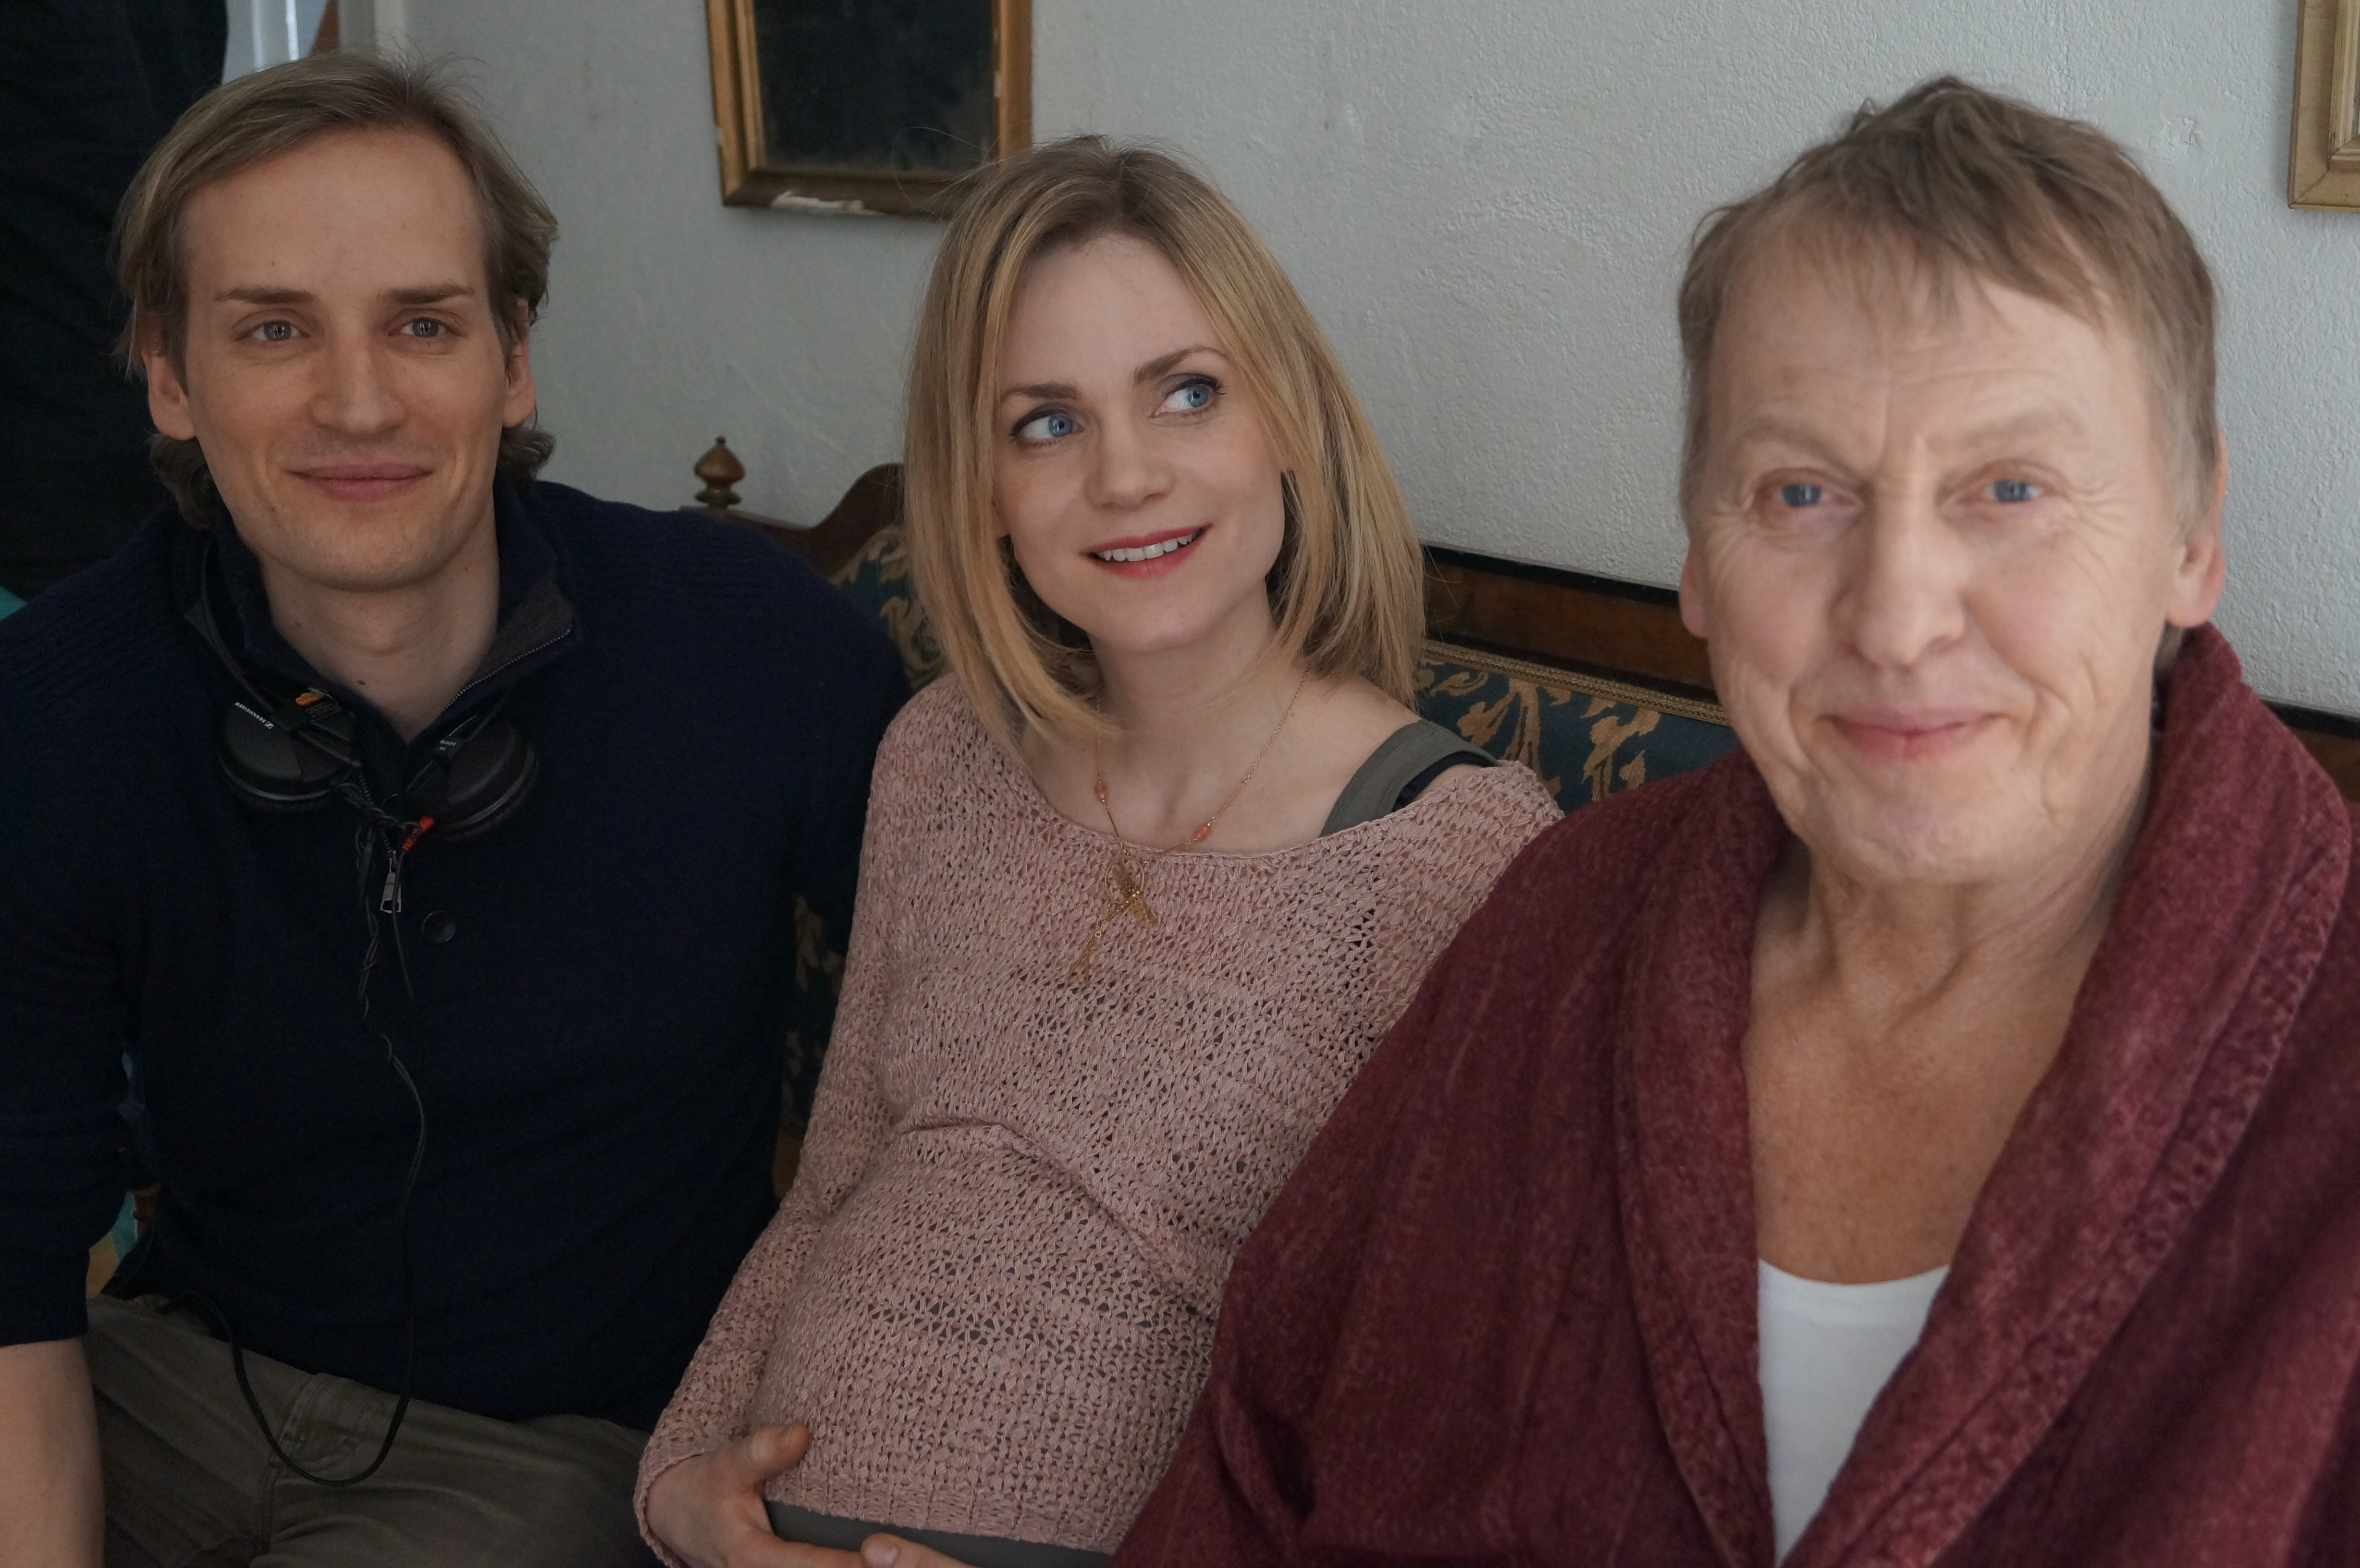 Director Casper Andreas with actors Liv Mjönäs and Tomas von Brömssen during the shooting of A LAST FAREWELL, February 2013.